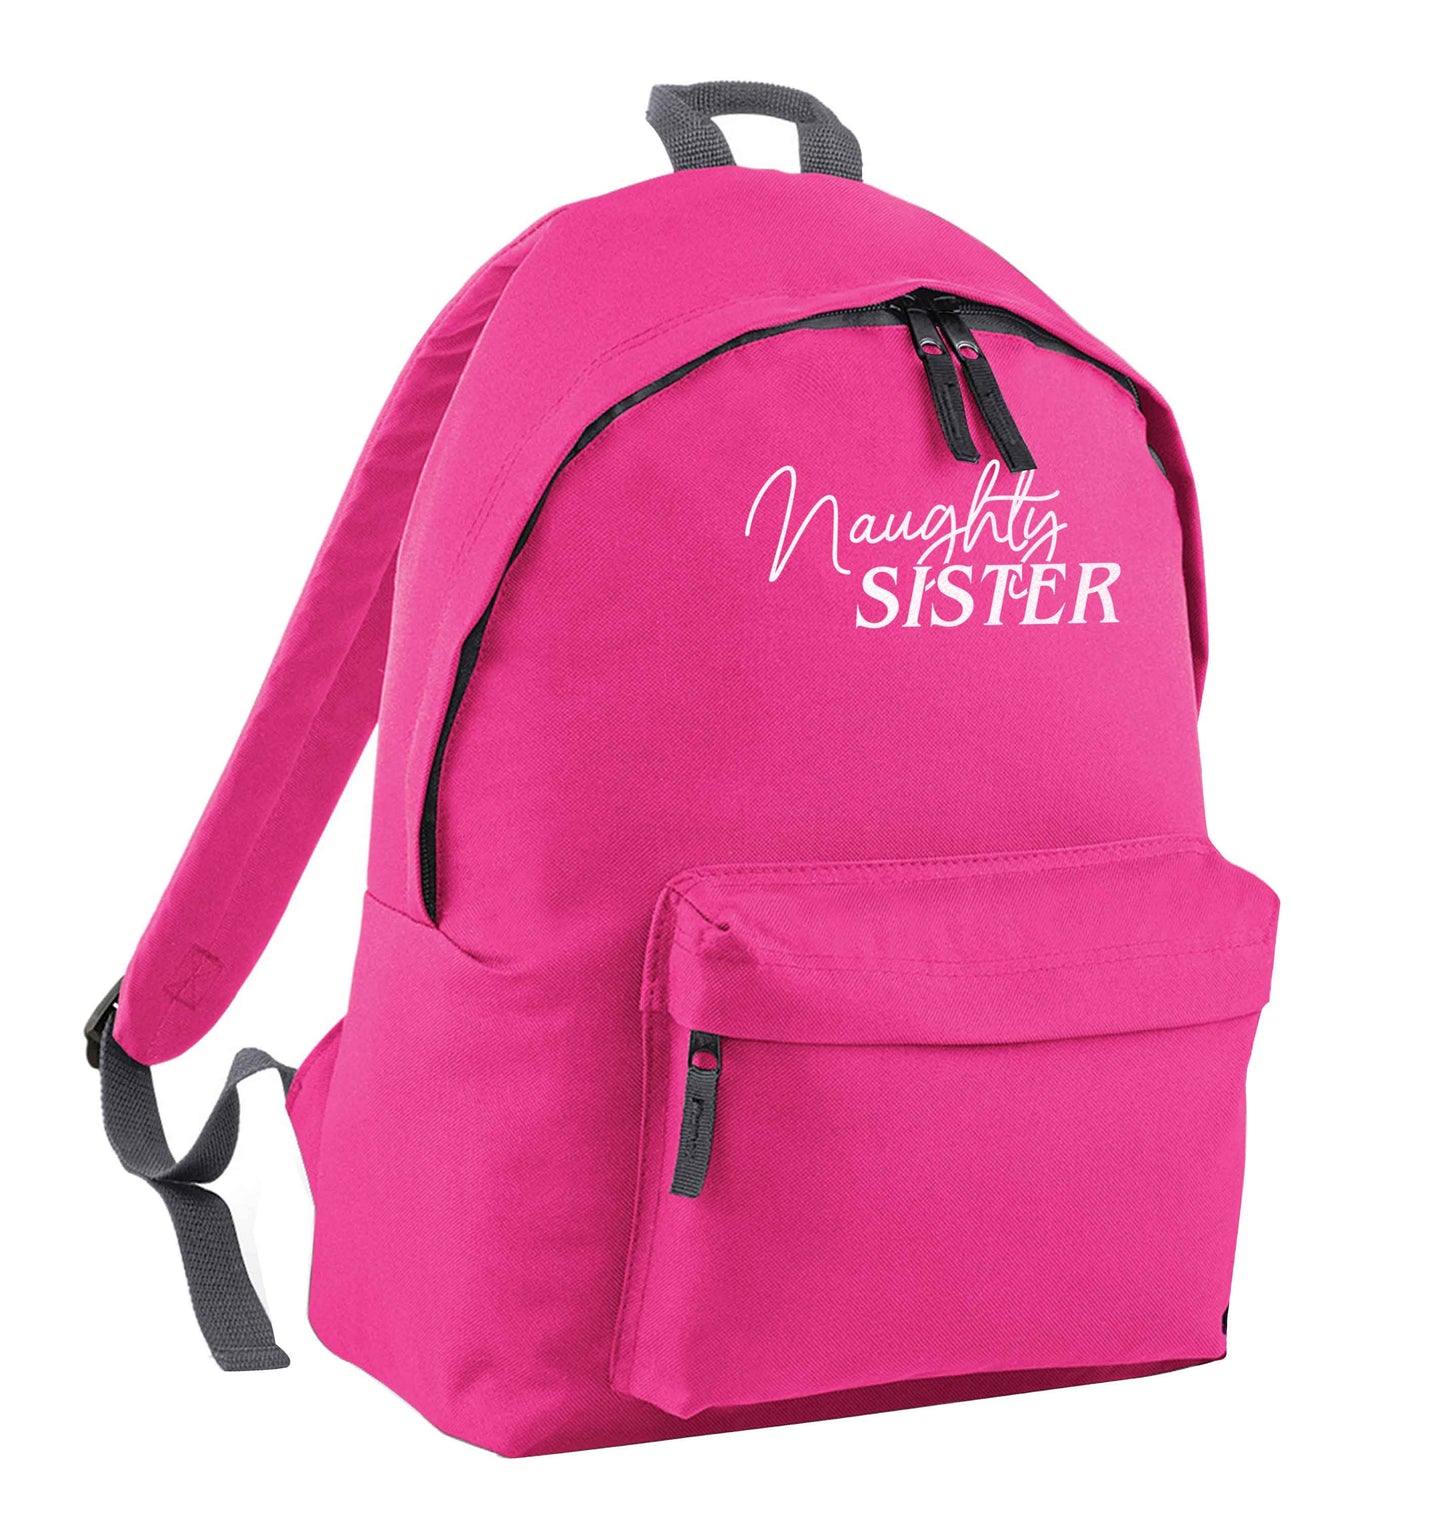 Naughty Sister pink adults backpack